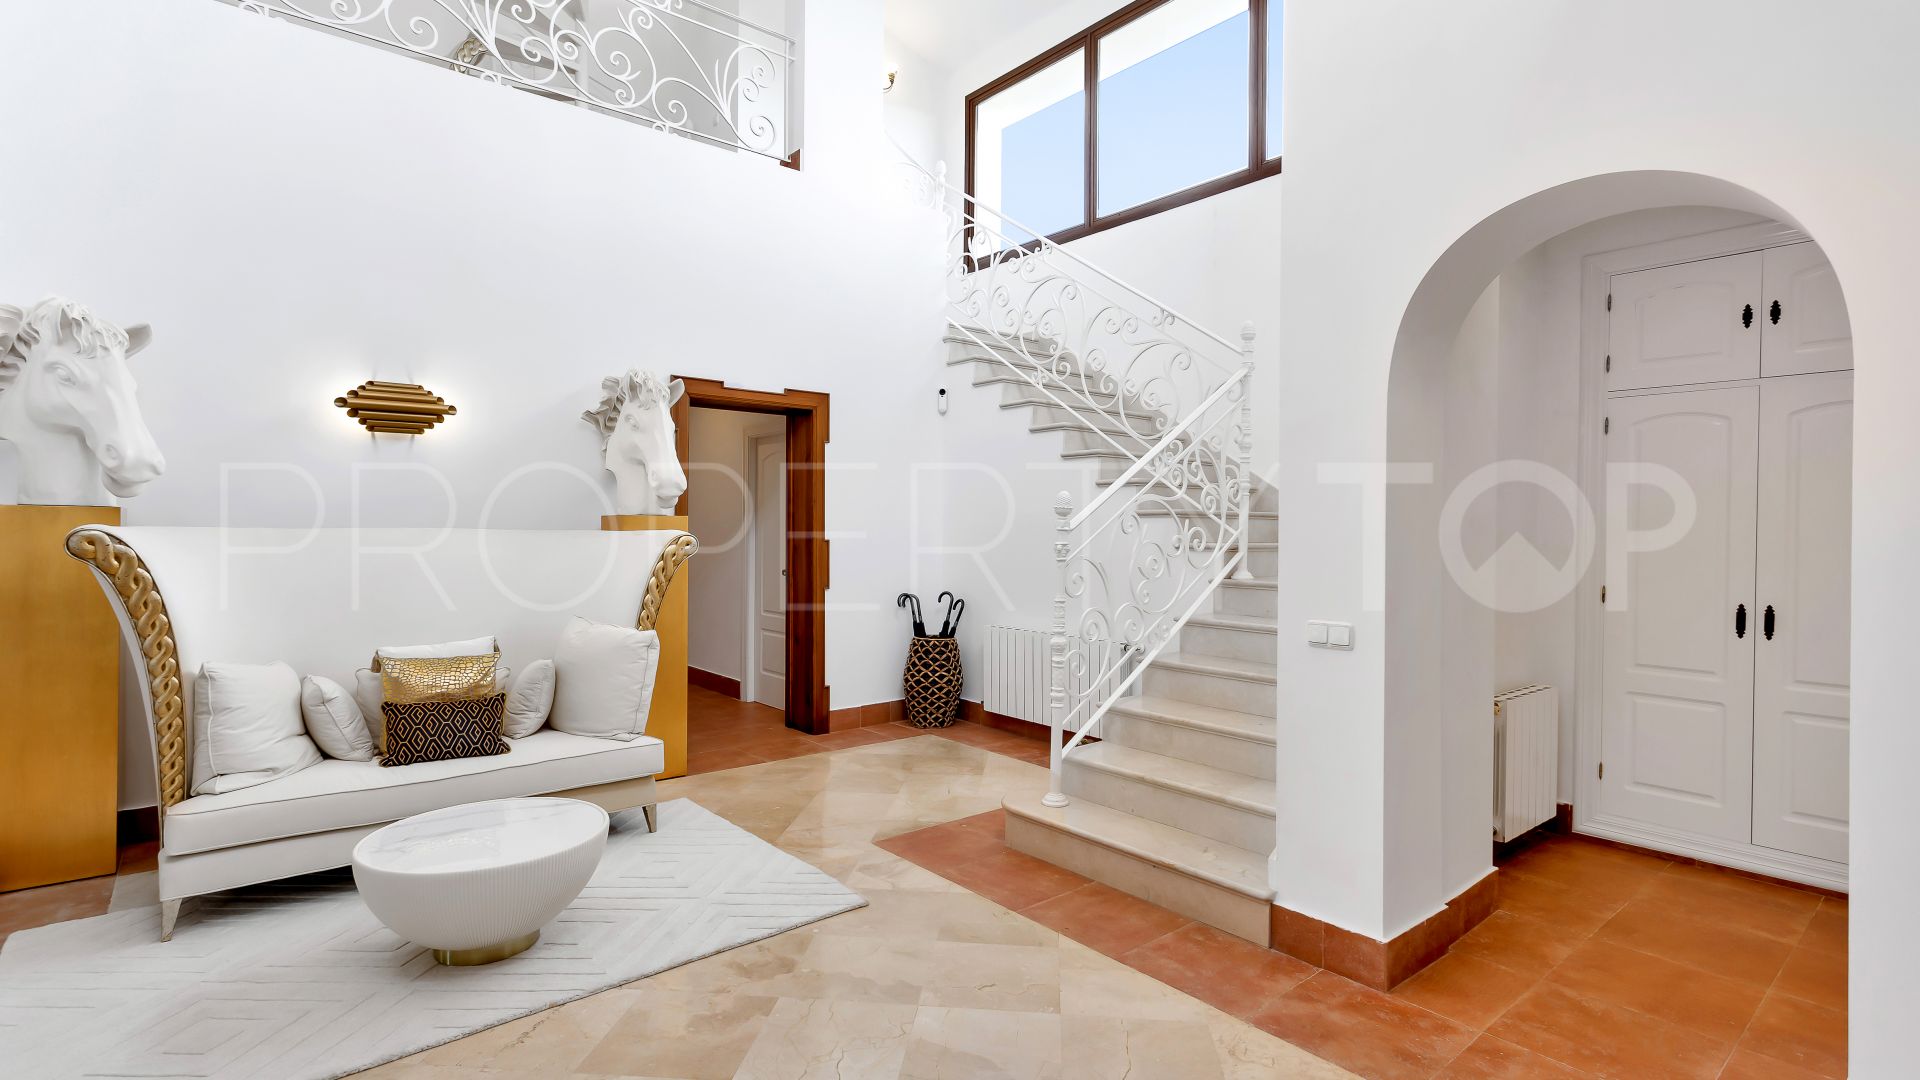 For sale villa with 5 bedrooms in Zona G